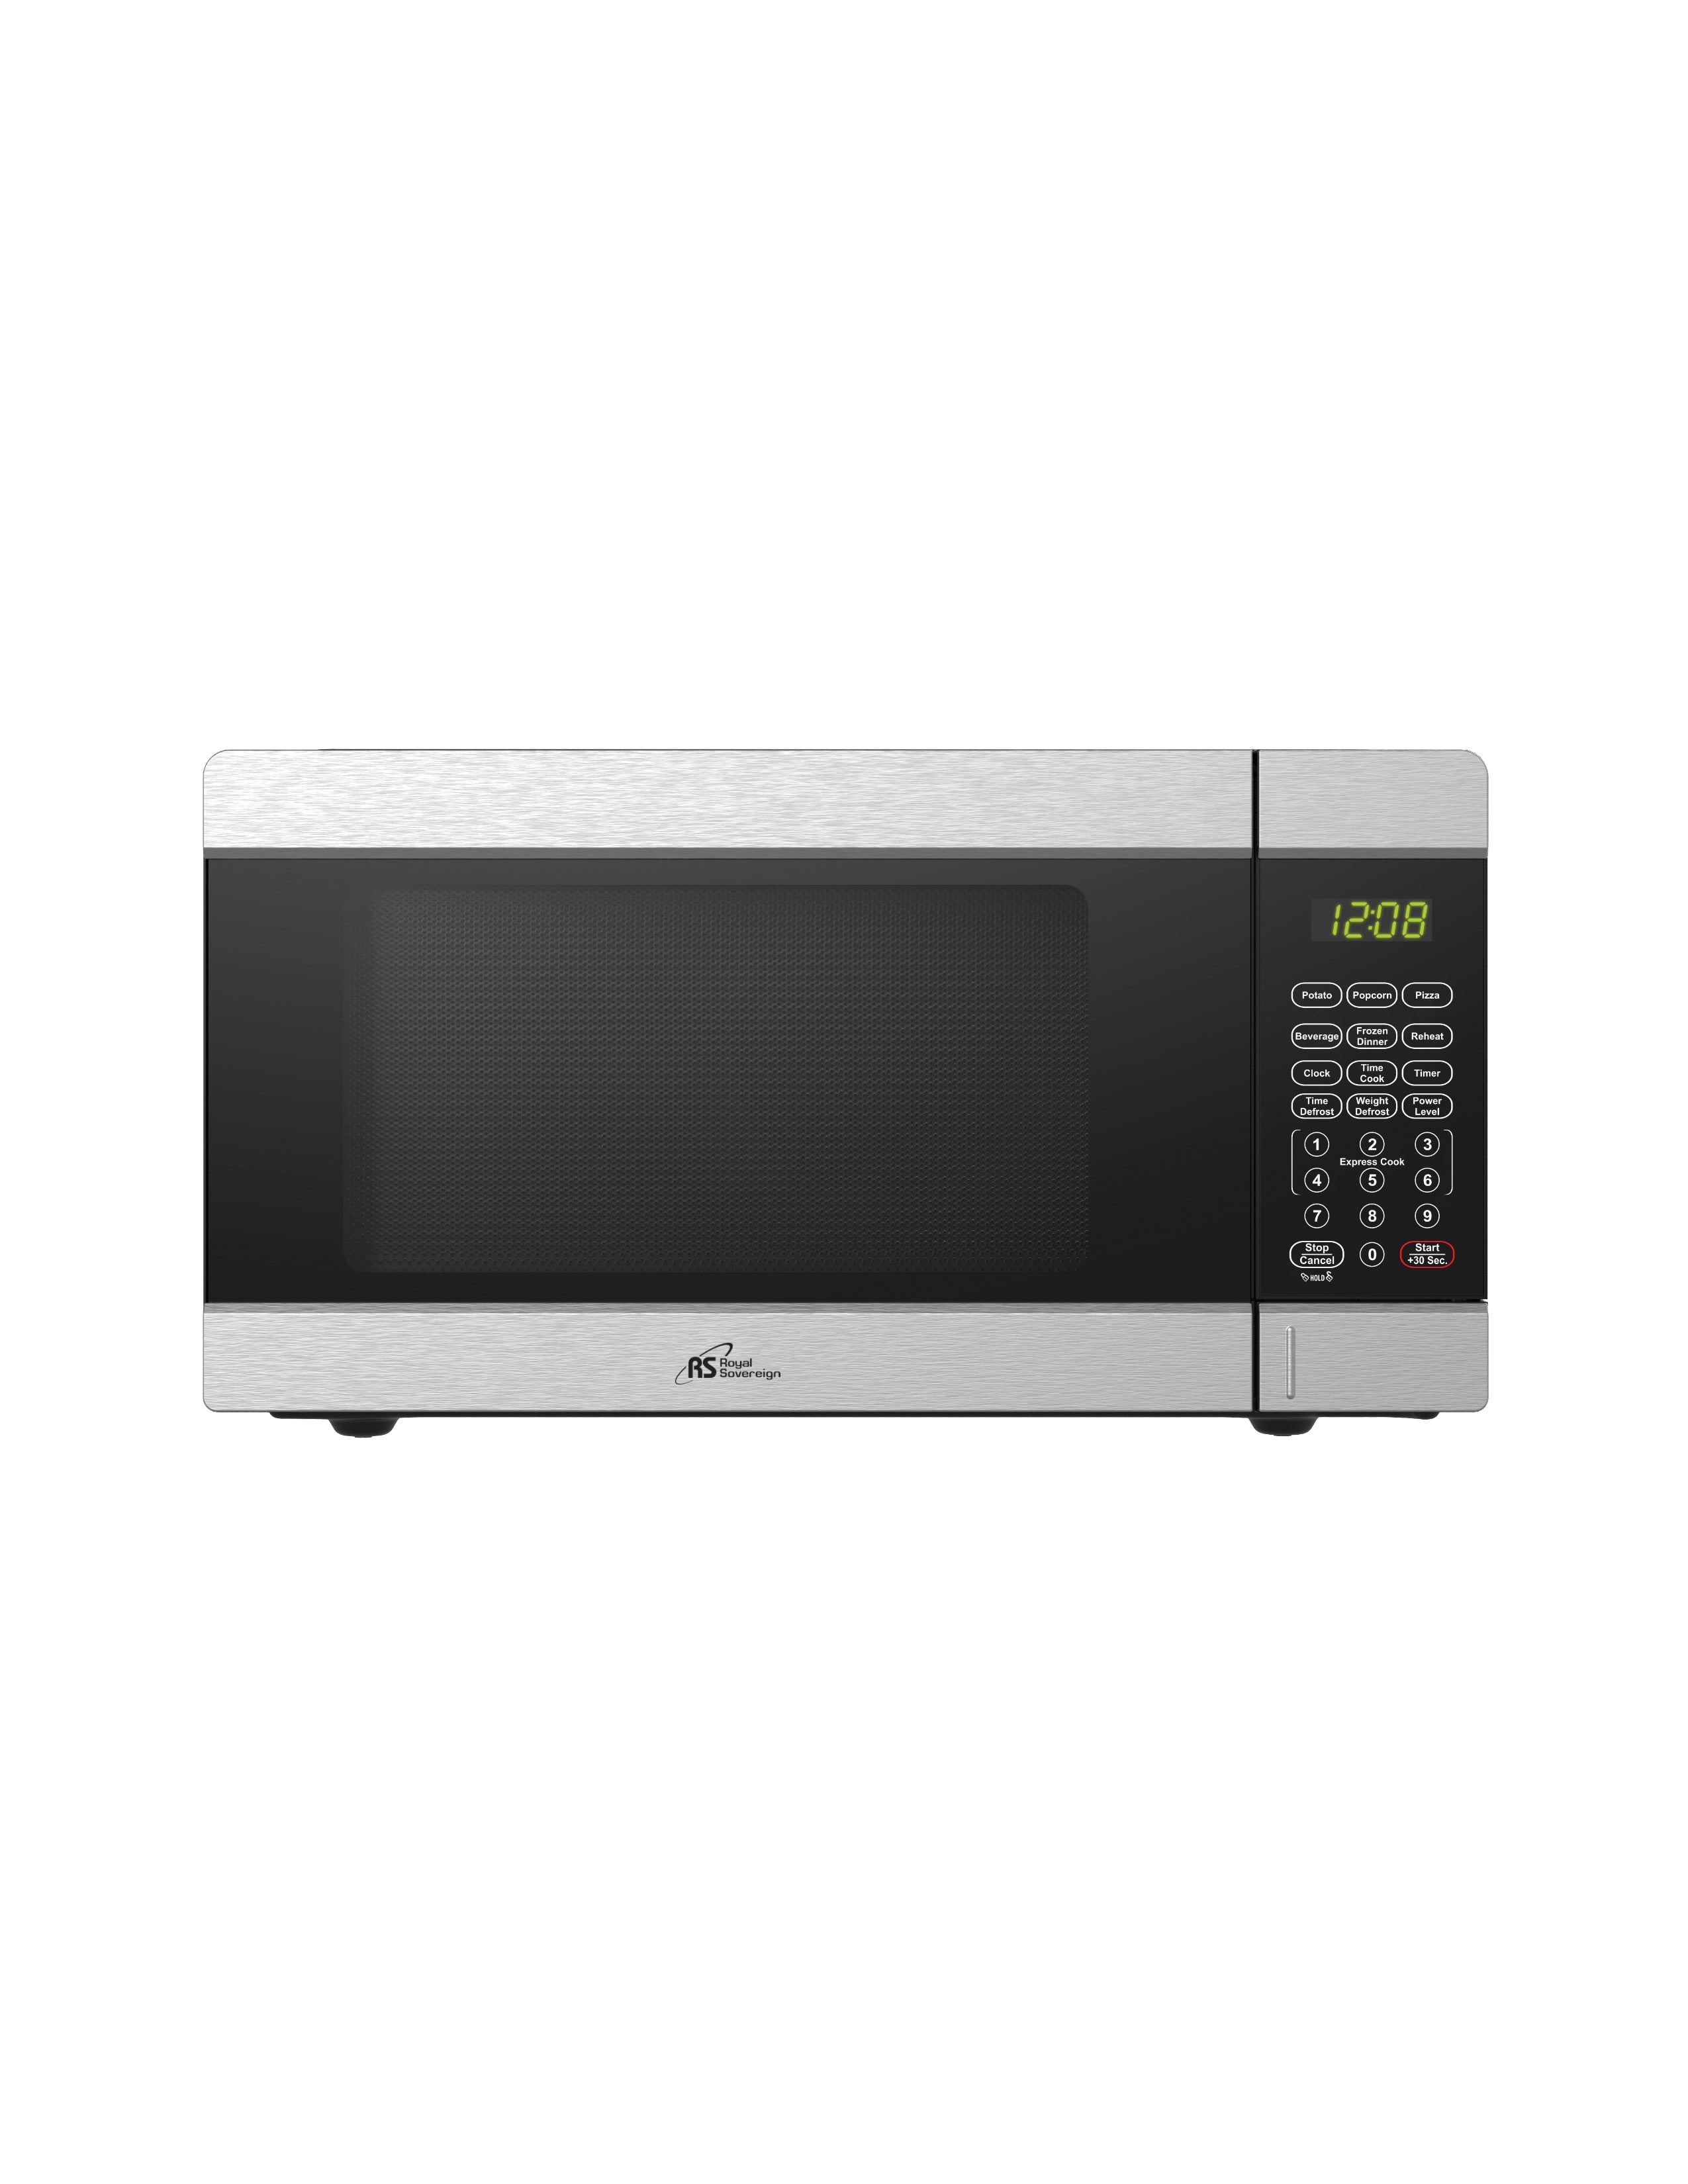 RMW25-900SS/ 0.9 Cu. ft Countertop Microwave Oven Stainless Steel